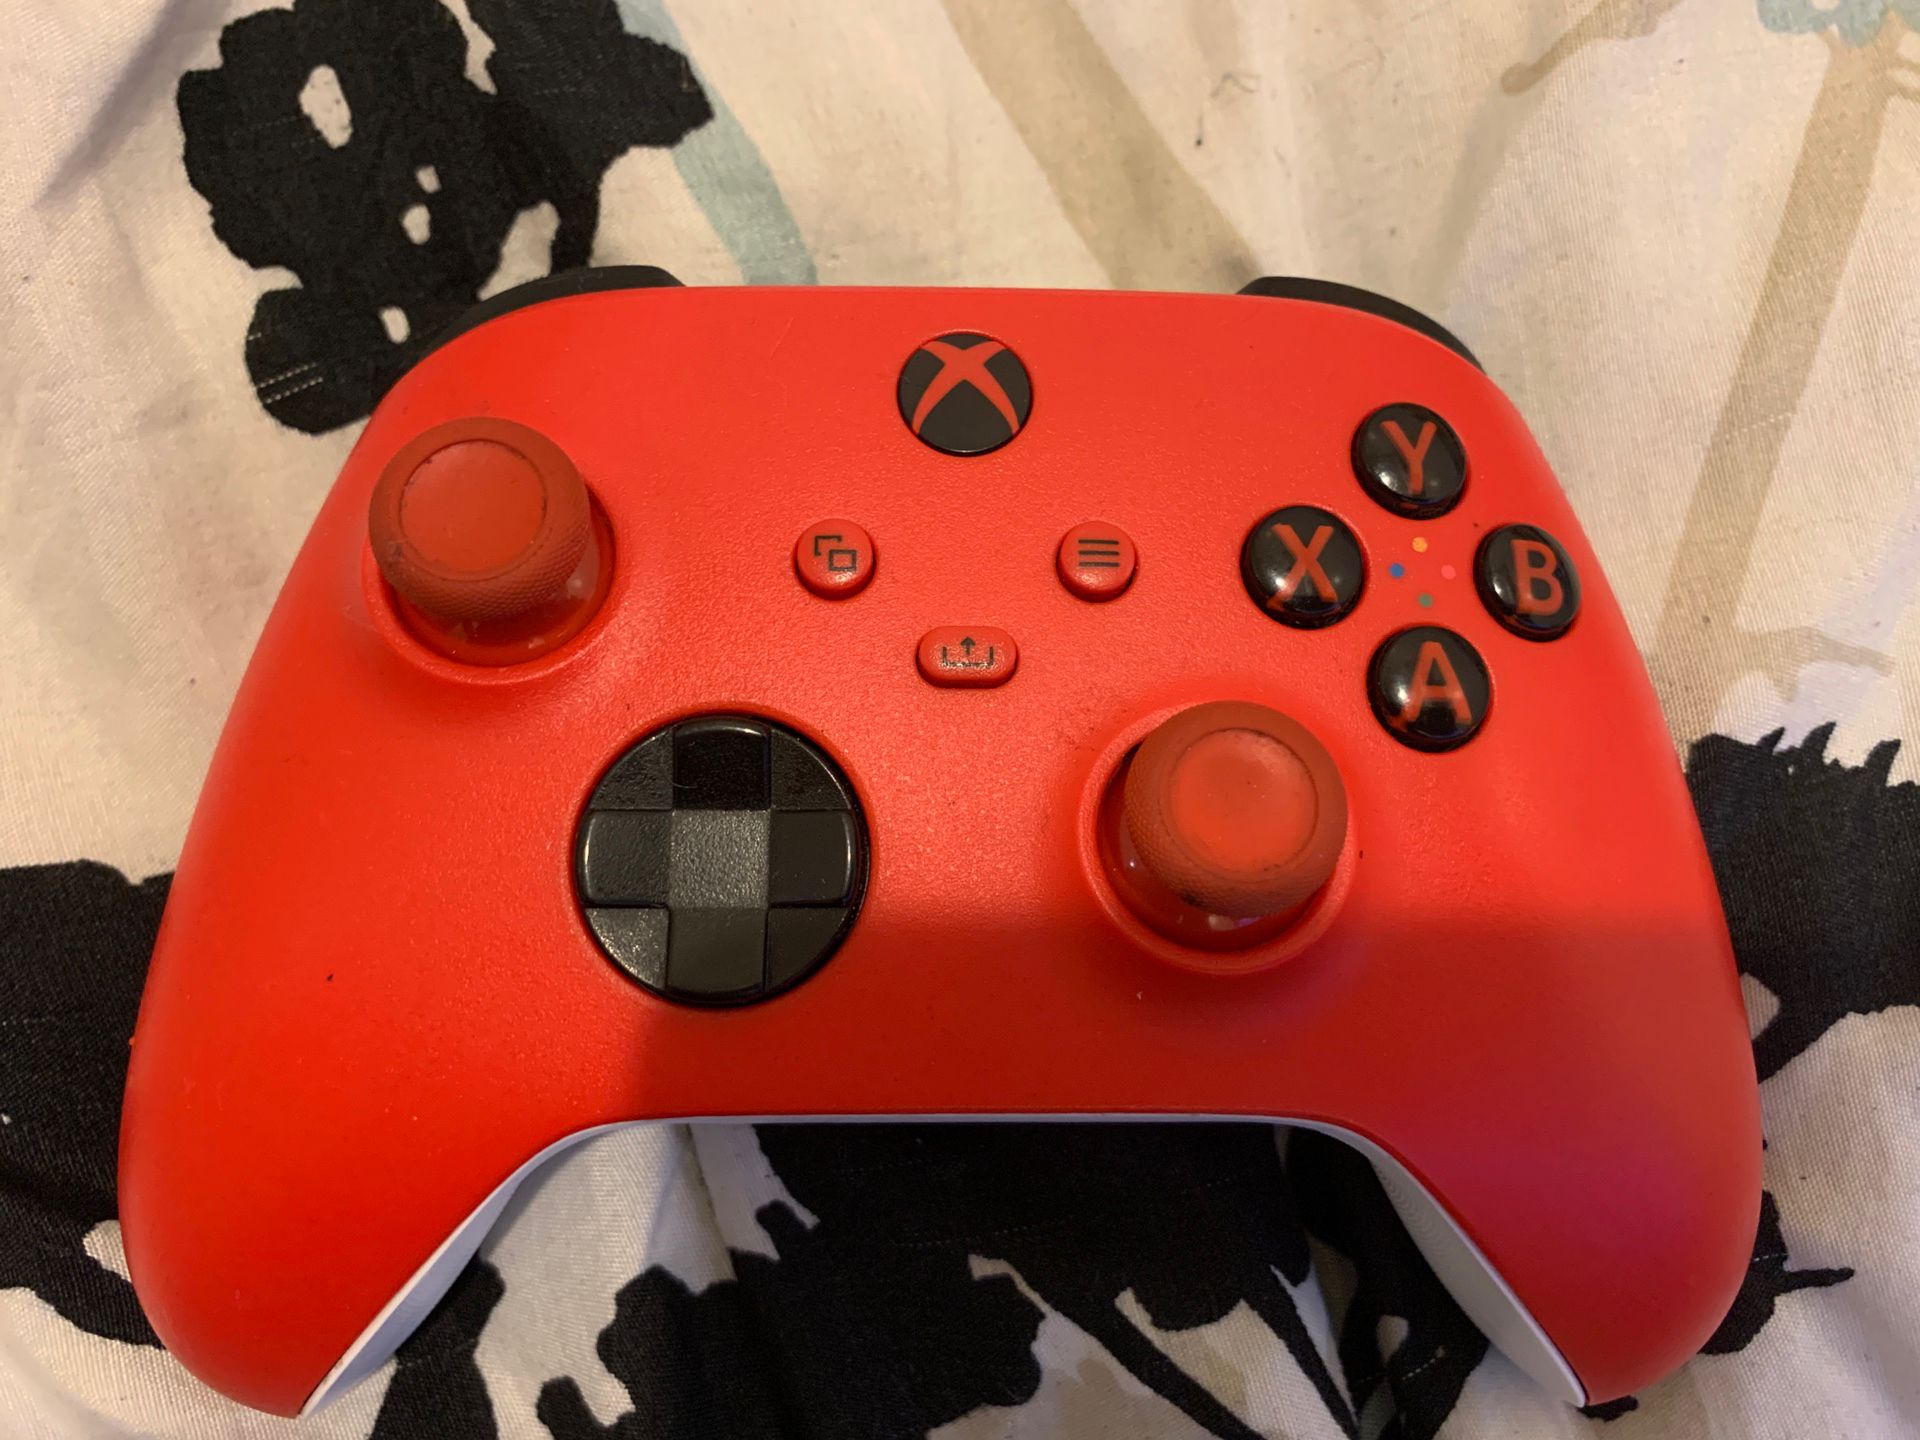 Cherry Red Xbox One Series X Controller 